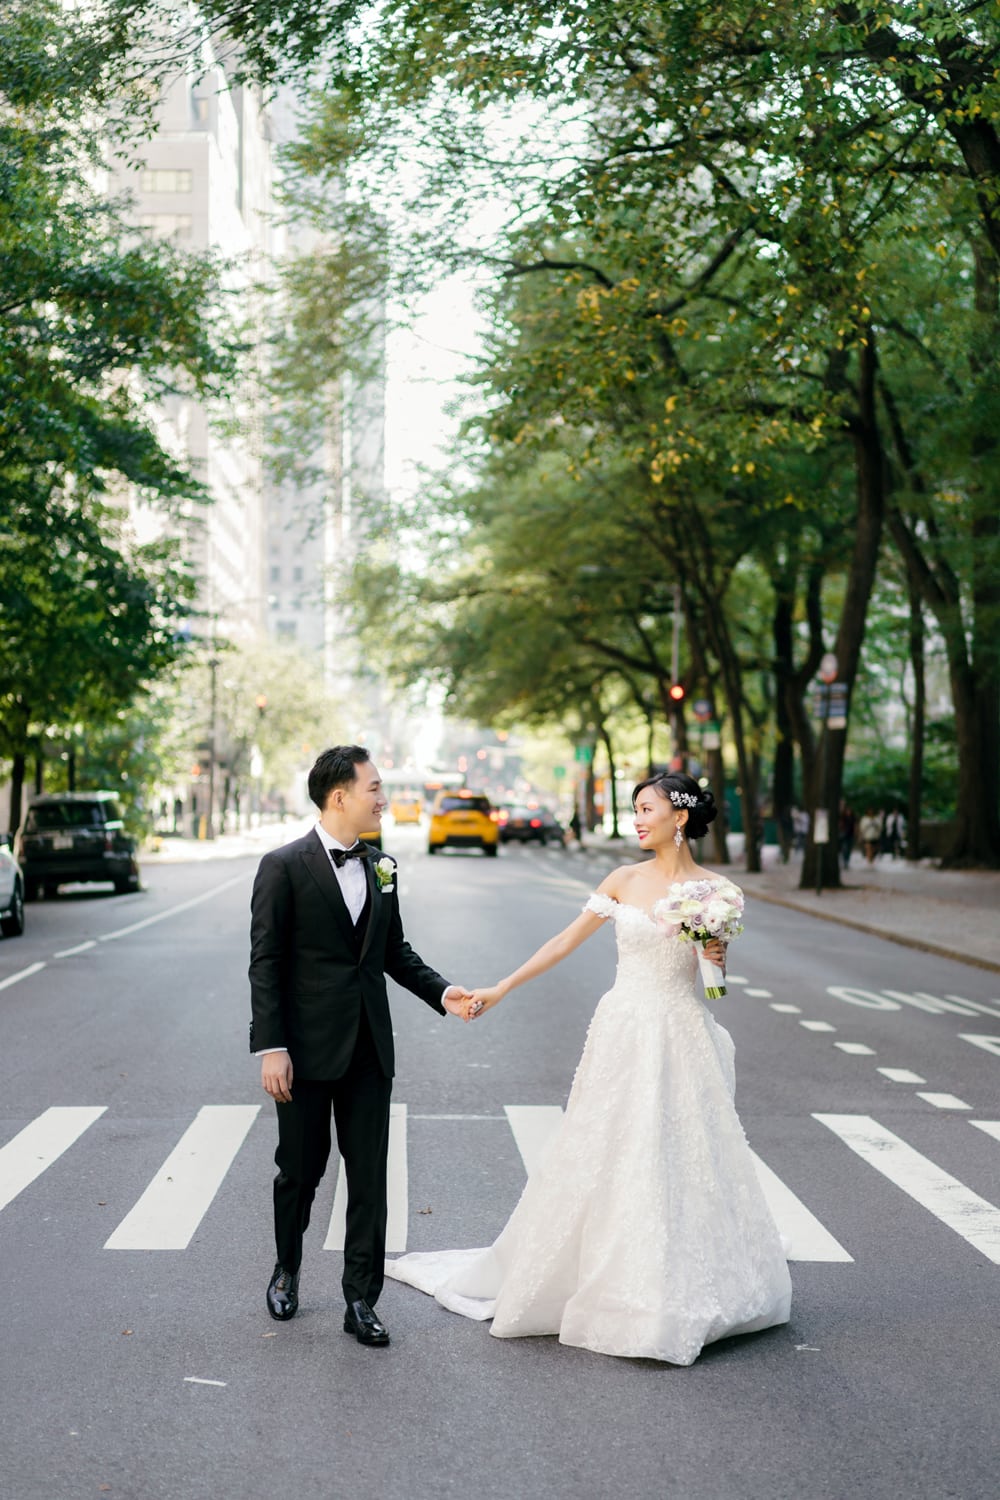 The bride and groom's portrait photos at the Fifth Avenue